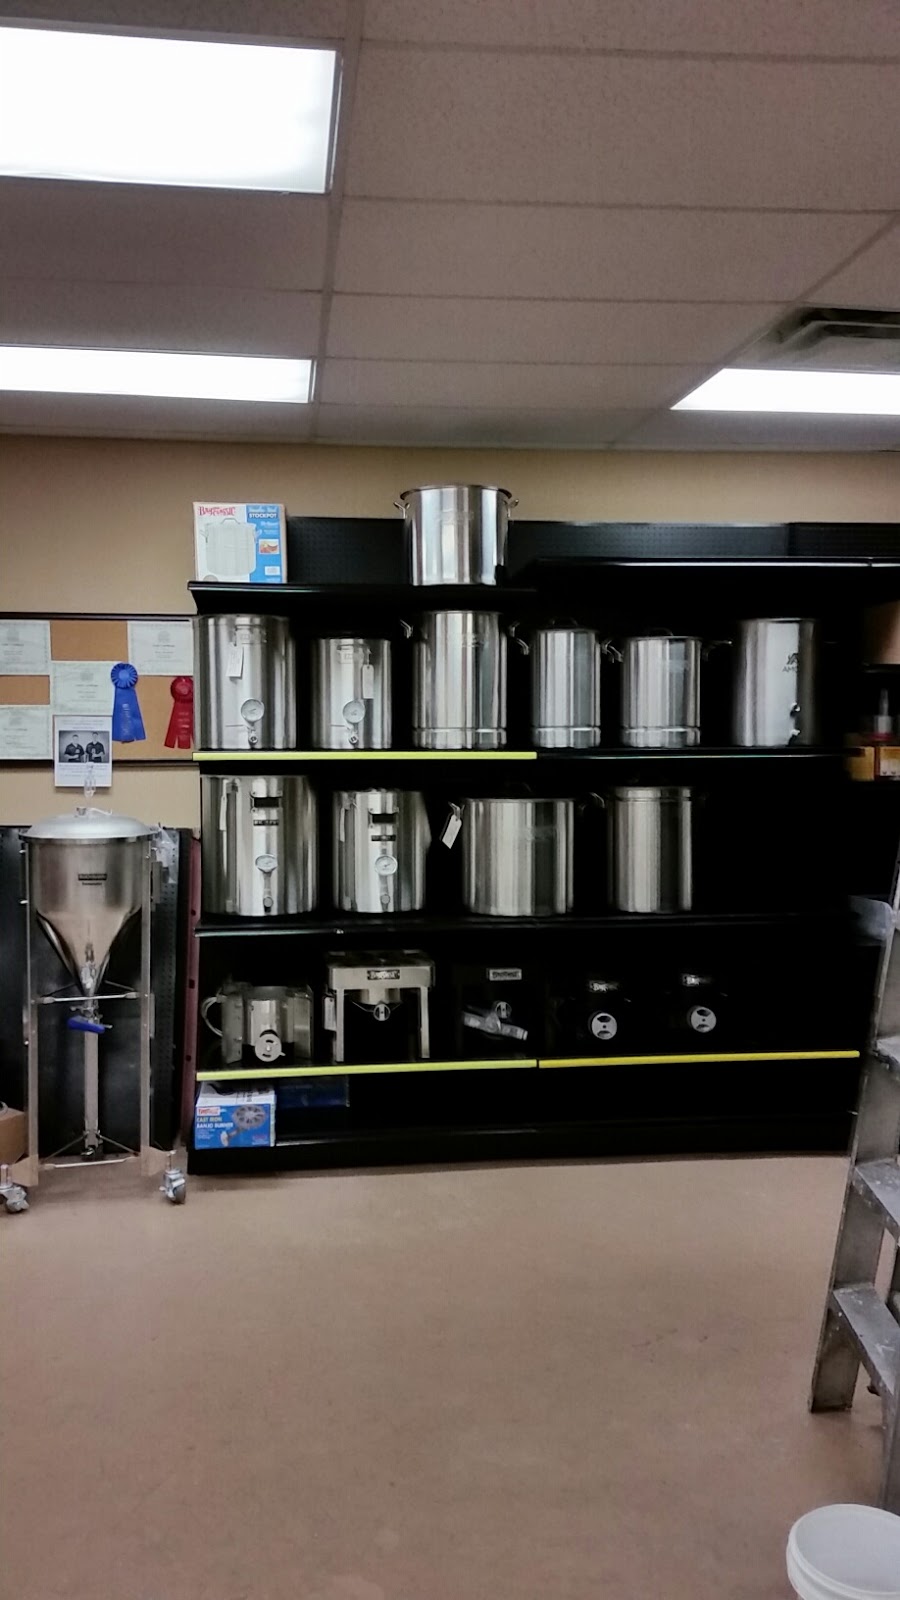 Homebrewing Supplies | 135 Main St, Whitehouse Station, NJ 08889 | Phone: (908) 823-4227